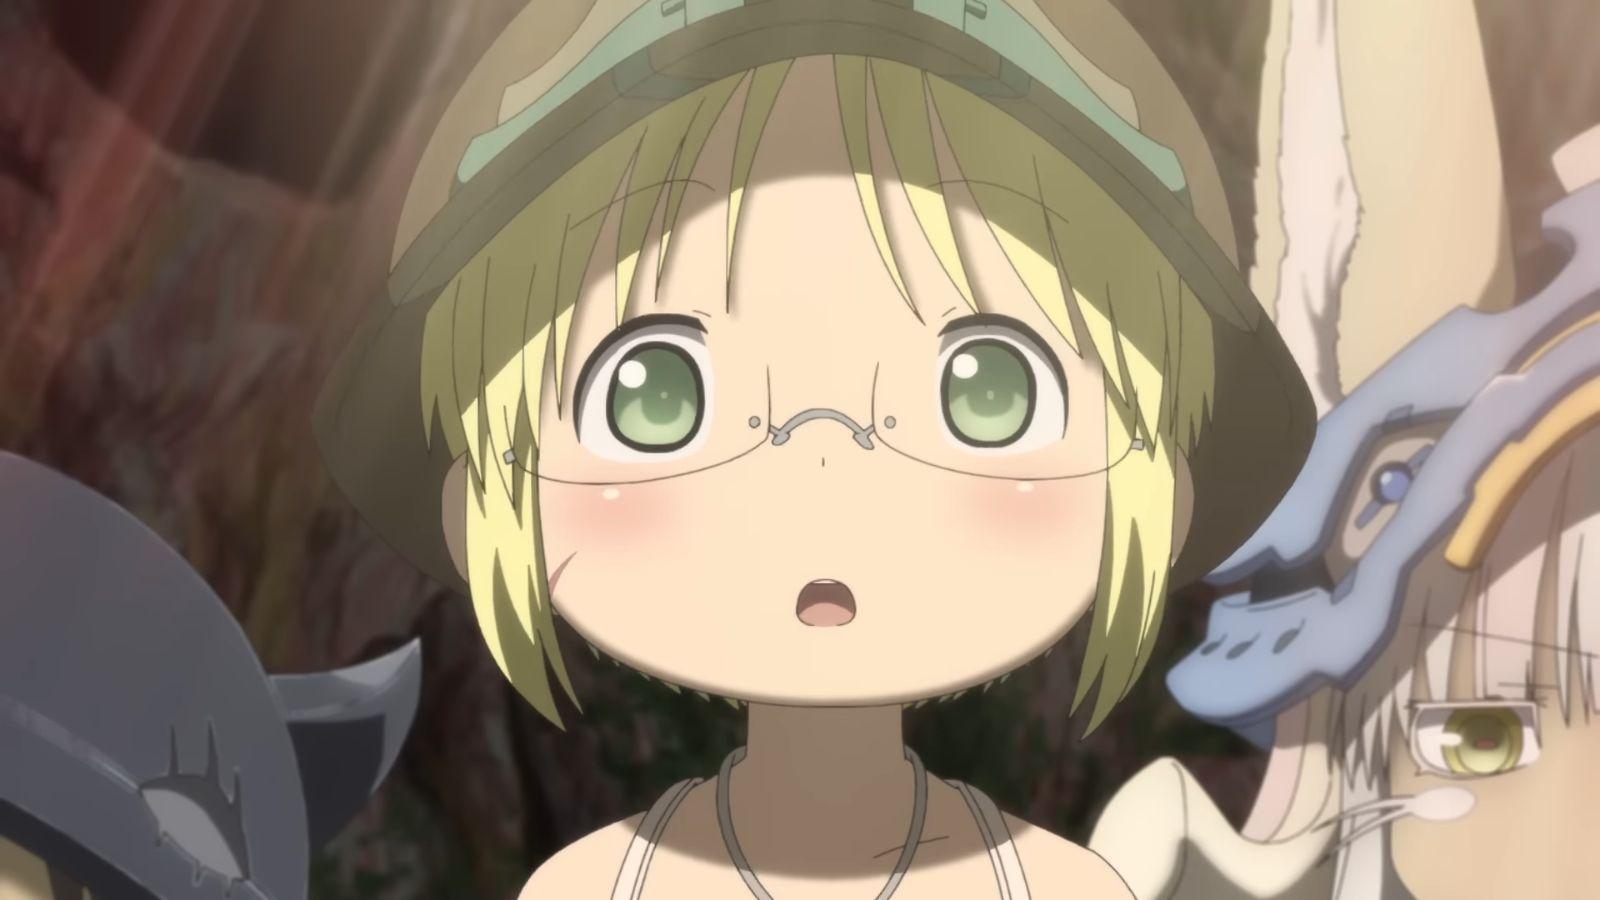 Made in Abyss Season 2 Episode 3 release date, what to expect, and more